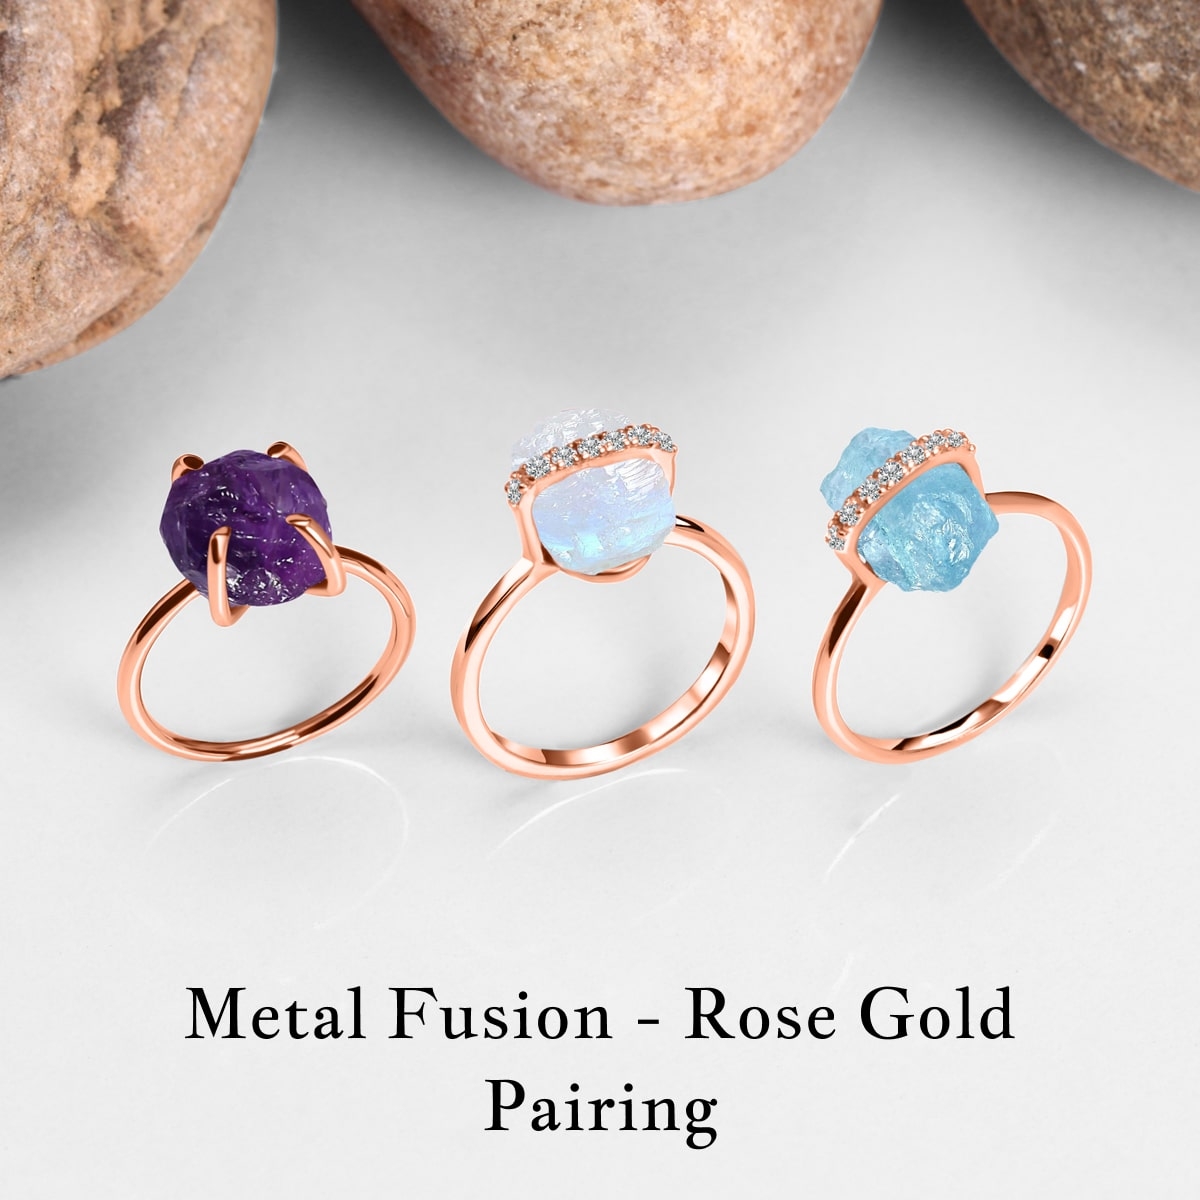 Pairing Rose Gold With Other Metals